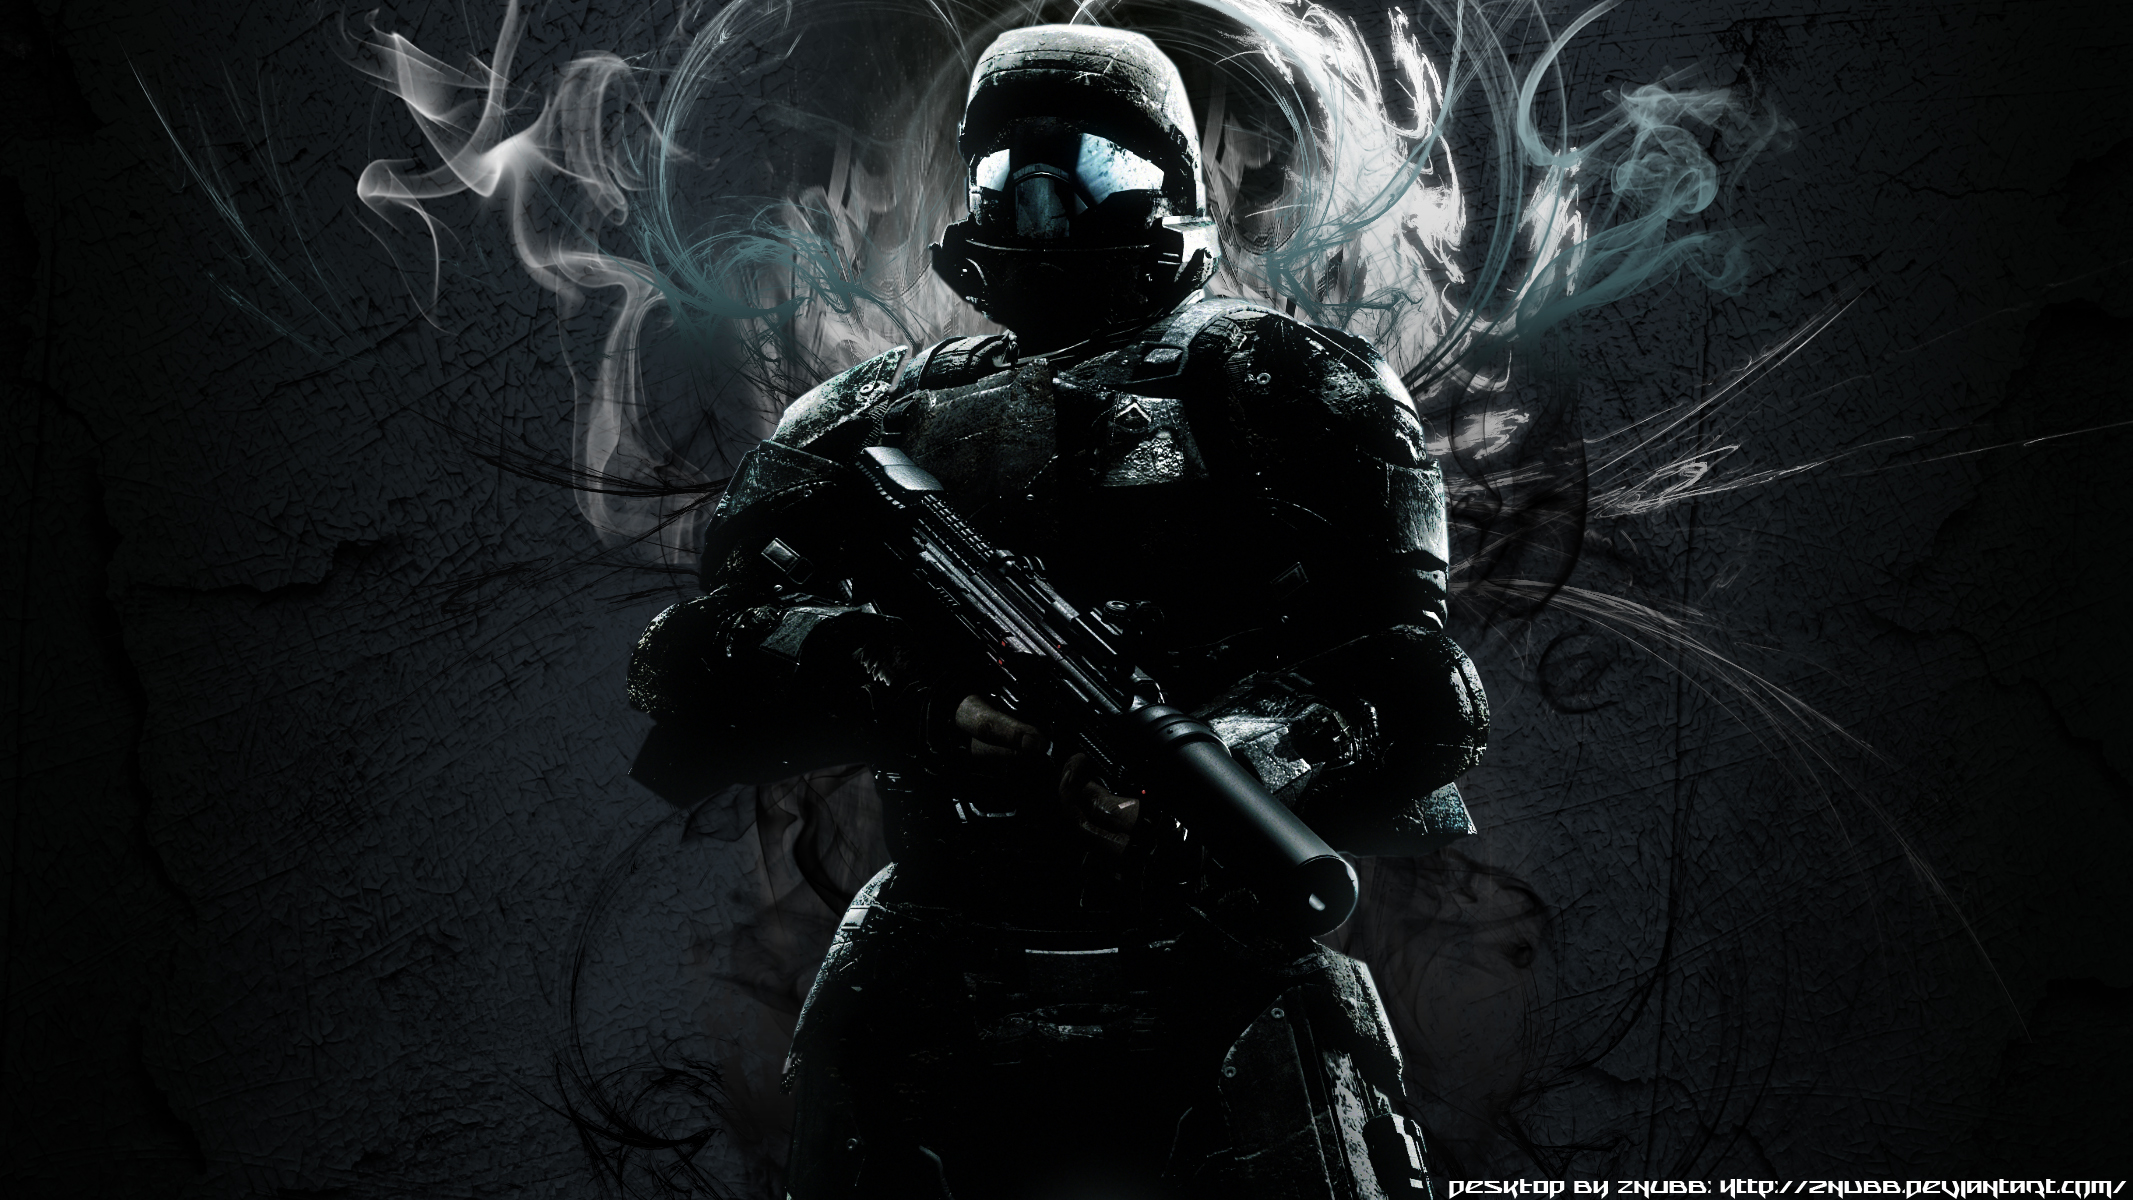 Halo Odst Image Crazy Gallery